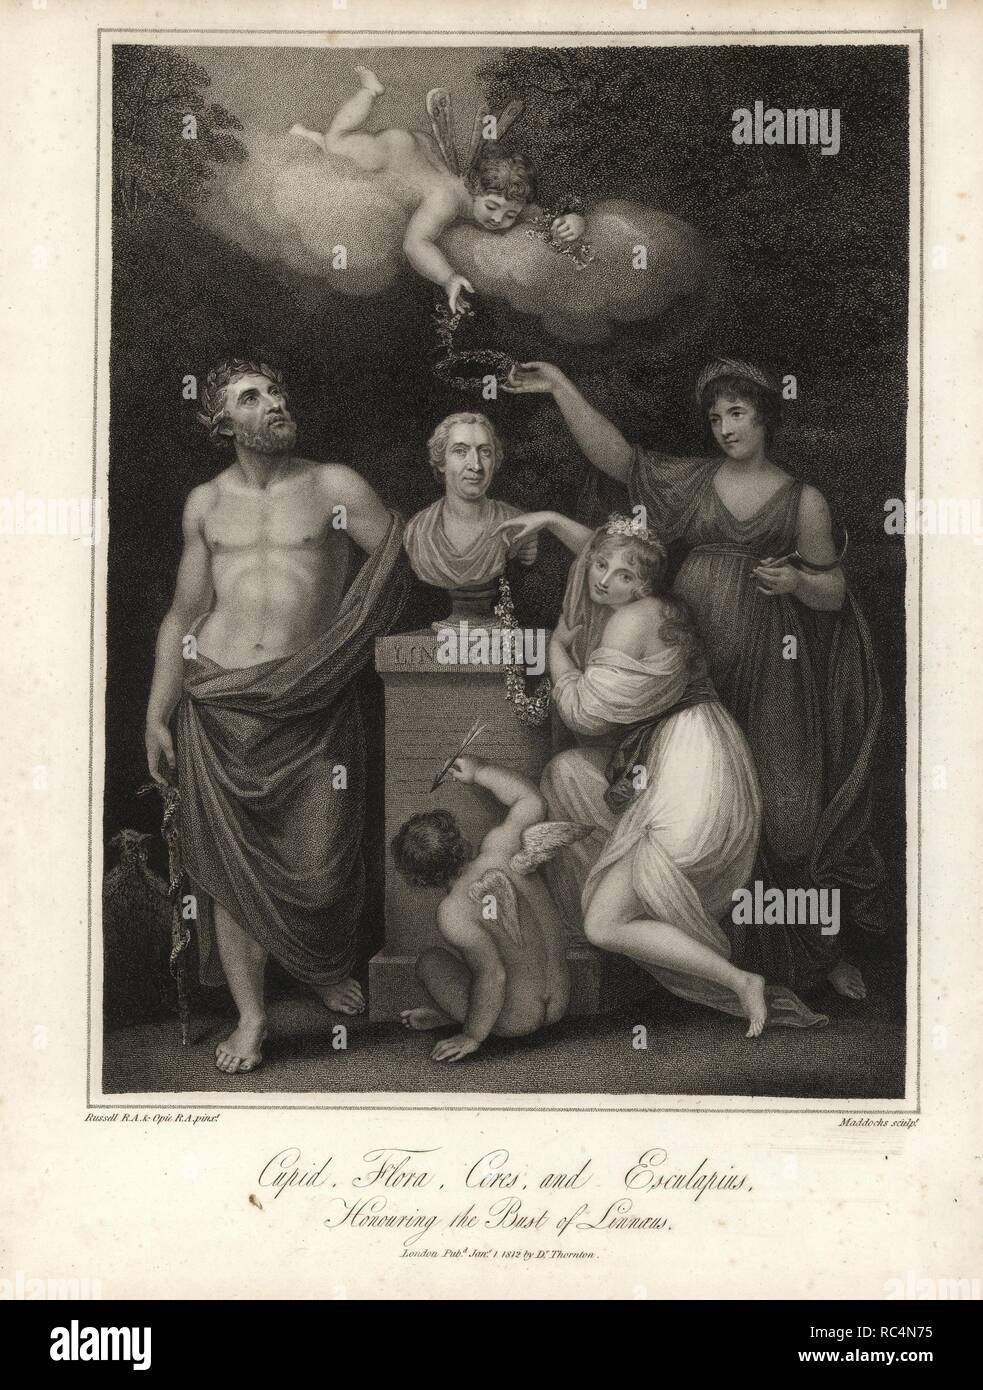 Cupid, Flora, Ceres and Esculapius honouring the bust of Linnaeus.. Stipple engraving by Maddochs from a painting by Russell and Opie from Dr. Robert John Thornton's 'Temple of Flora,' 1812, Lottery or quarto edition. The illustrations were a mix of aquatint, mezzotint and stipple engravings finished by hand. Dr. Thornton (1768?-1837) was a botanist and publisher who bankrupted himself producing what is now regarded as the greatest English botanical book. Stock Photo